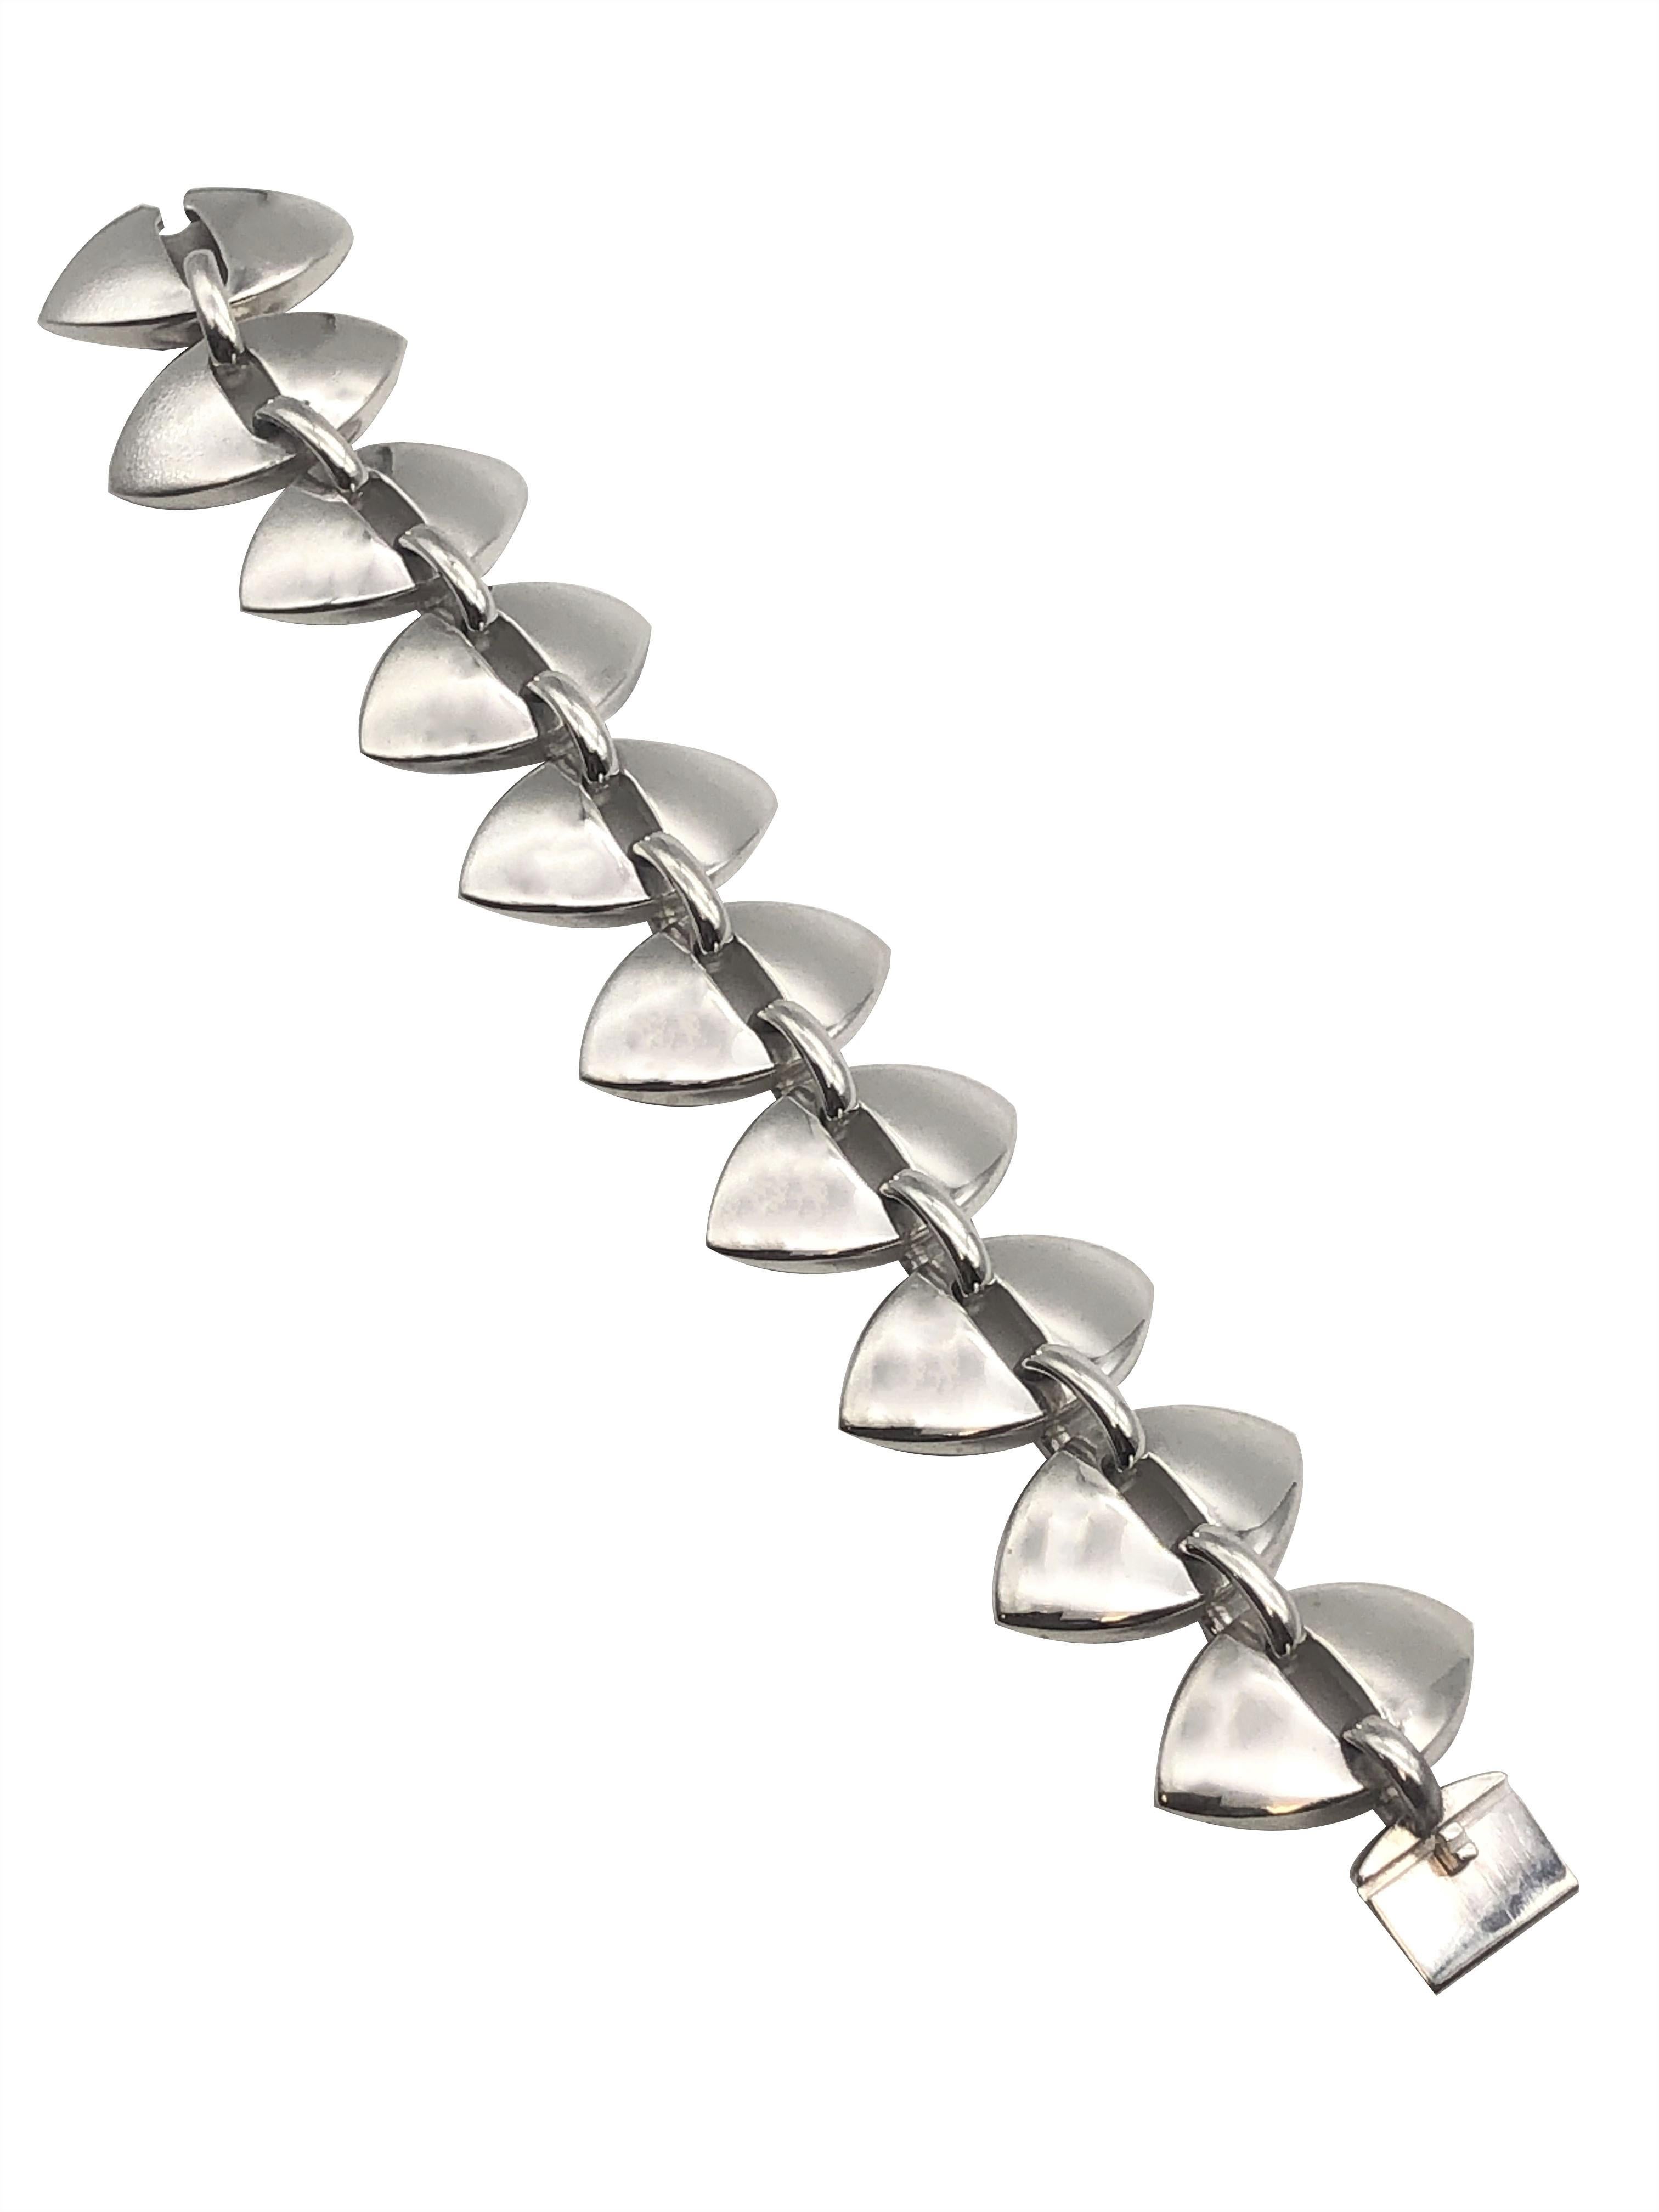 Circa 1950s Georg Jensen Denmark, Sterling Silver Bracelet # 106 by designer Nanna Ditzel, measuring 7 inches in length and 1 inch wide with solid links. 